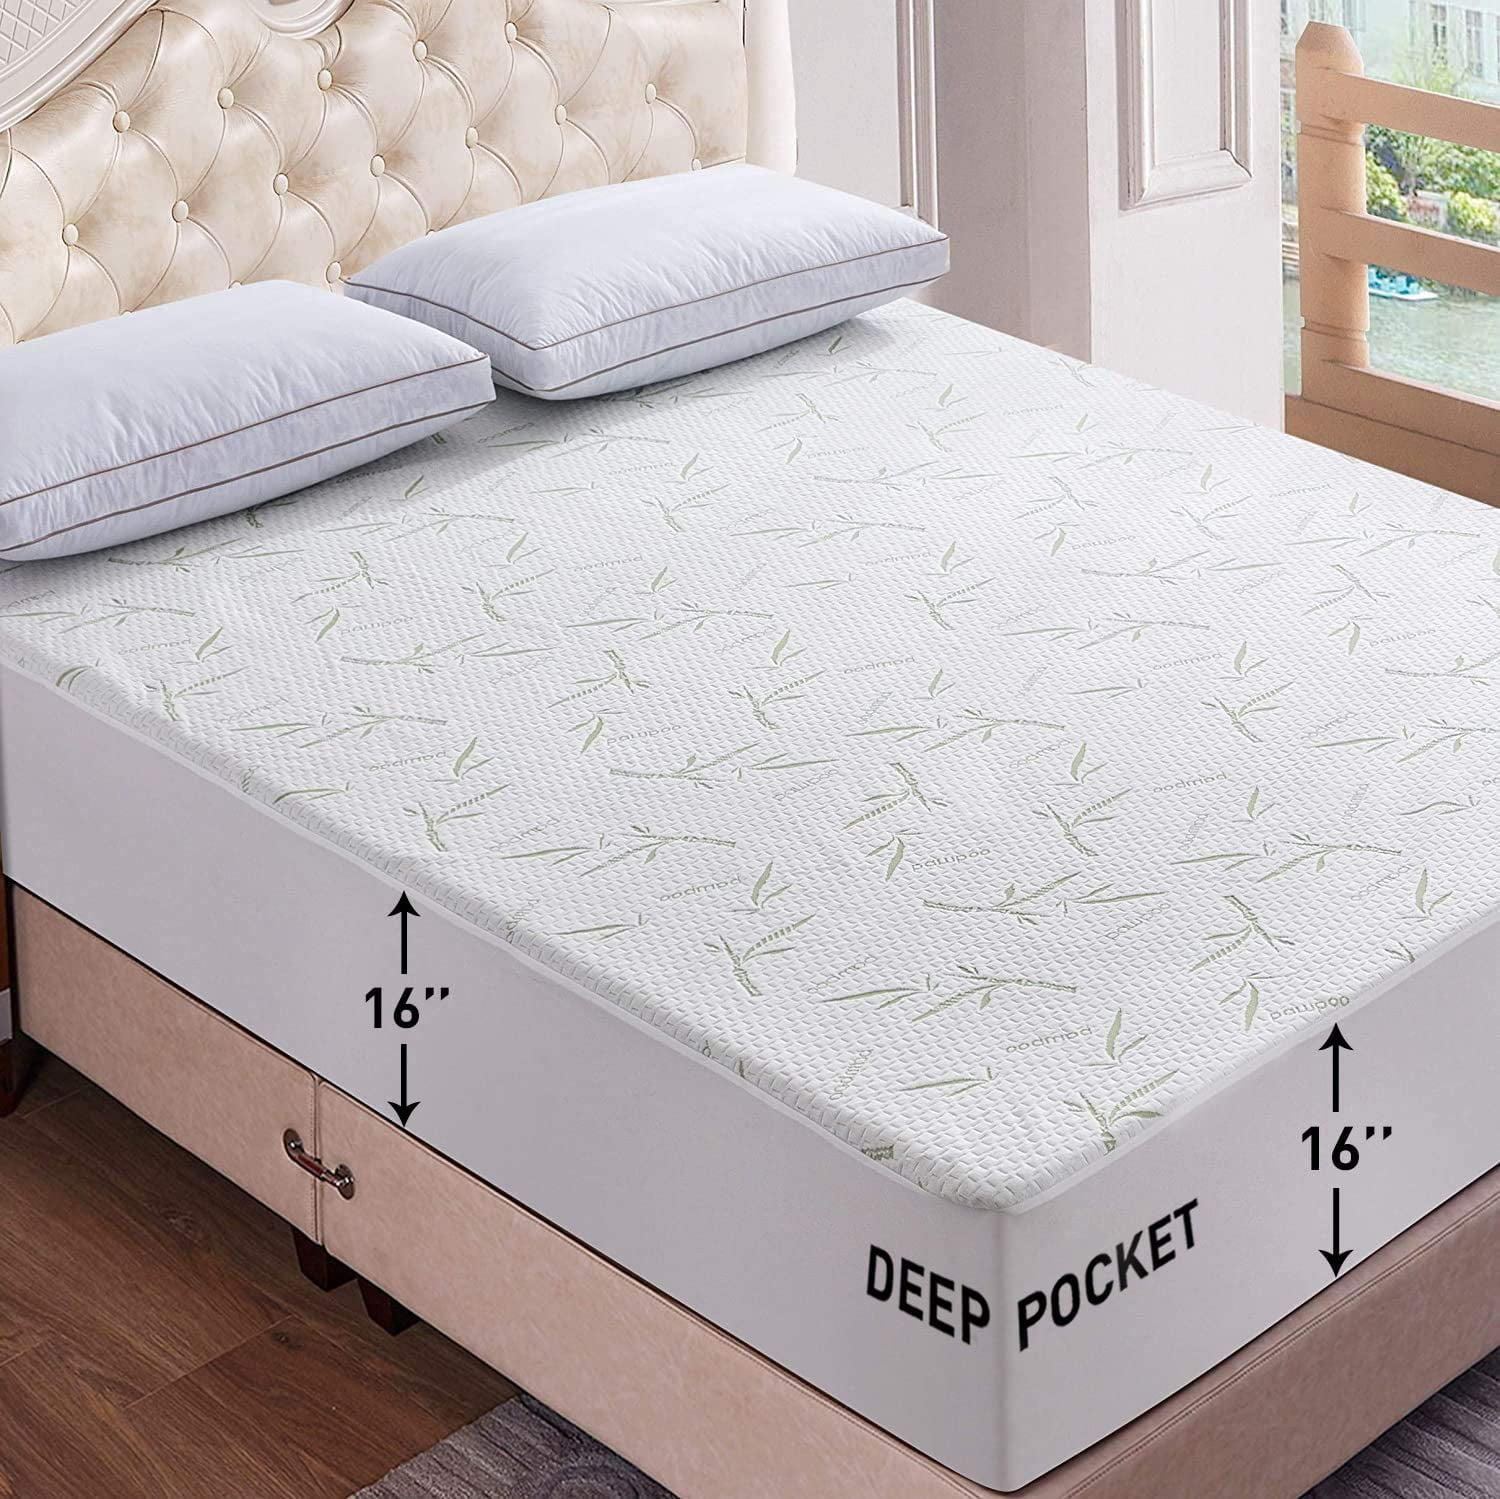 Bamboo Mattress Protector Breathable Comfortable Deep Pocket Topper Cover Pad 